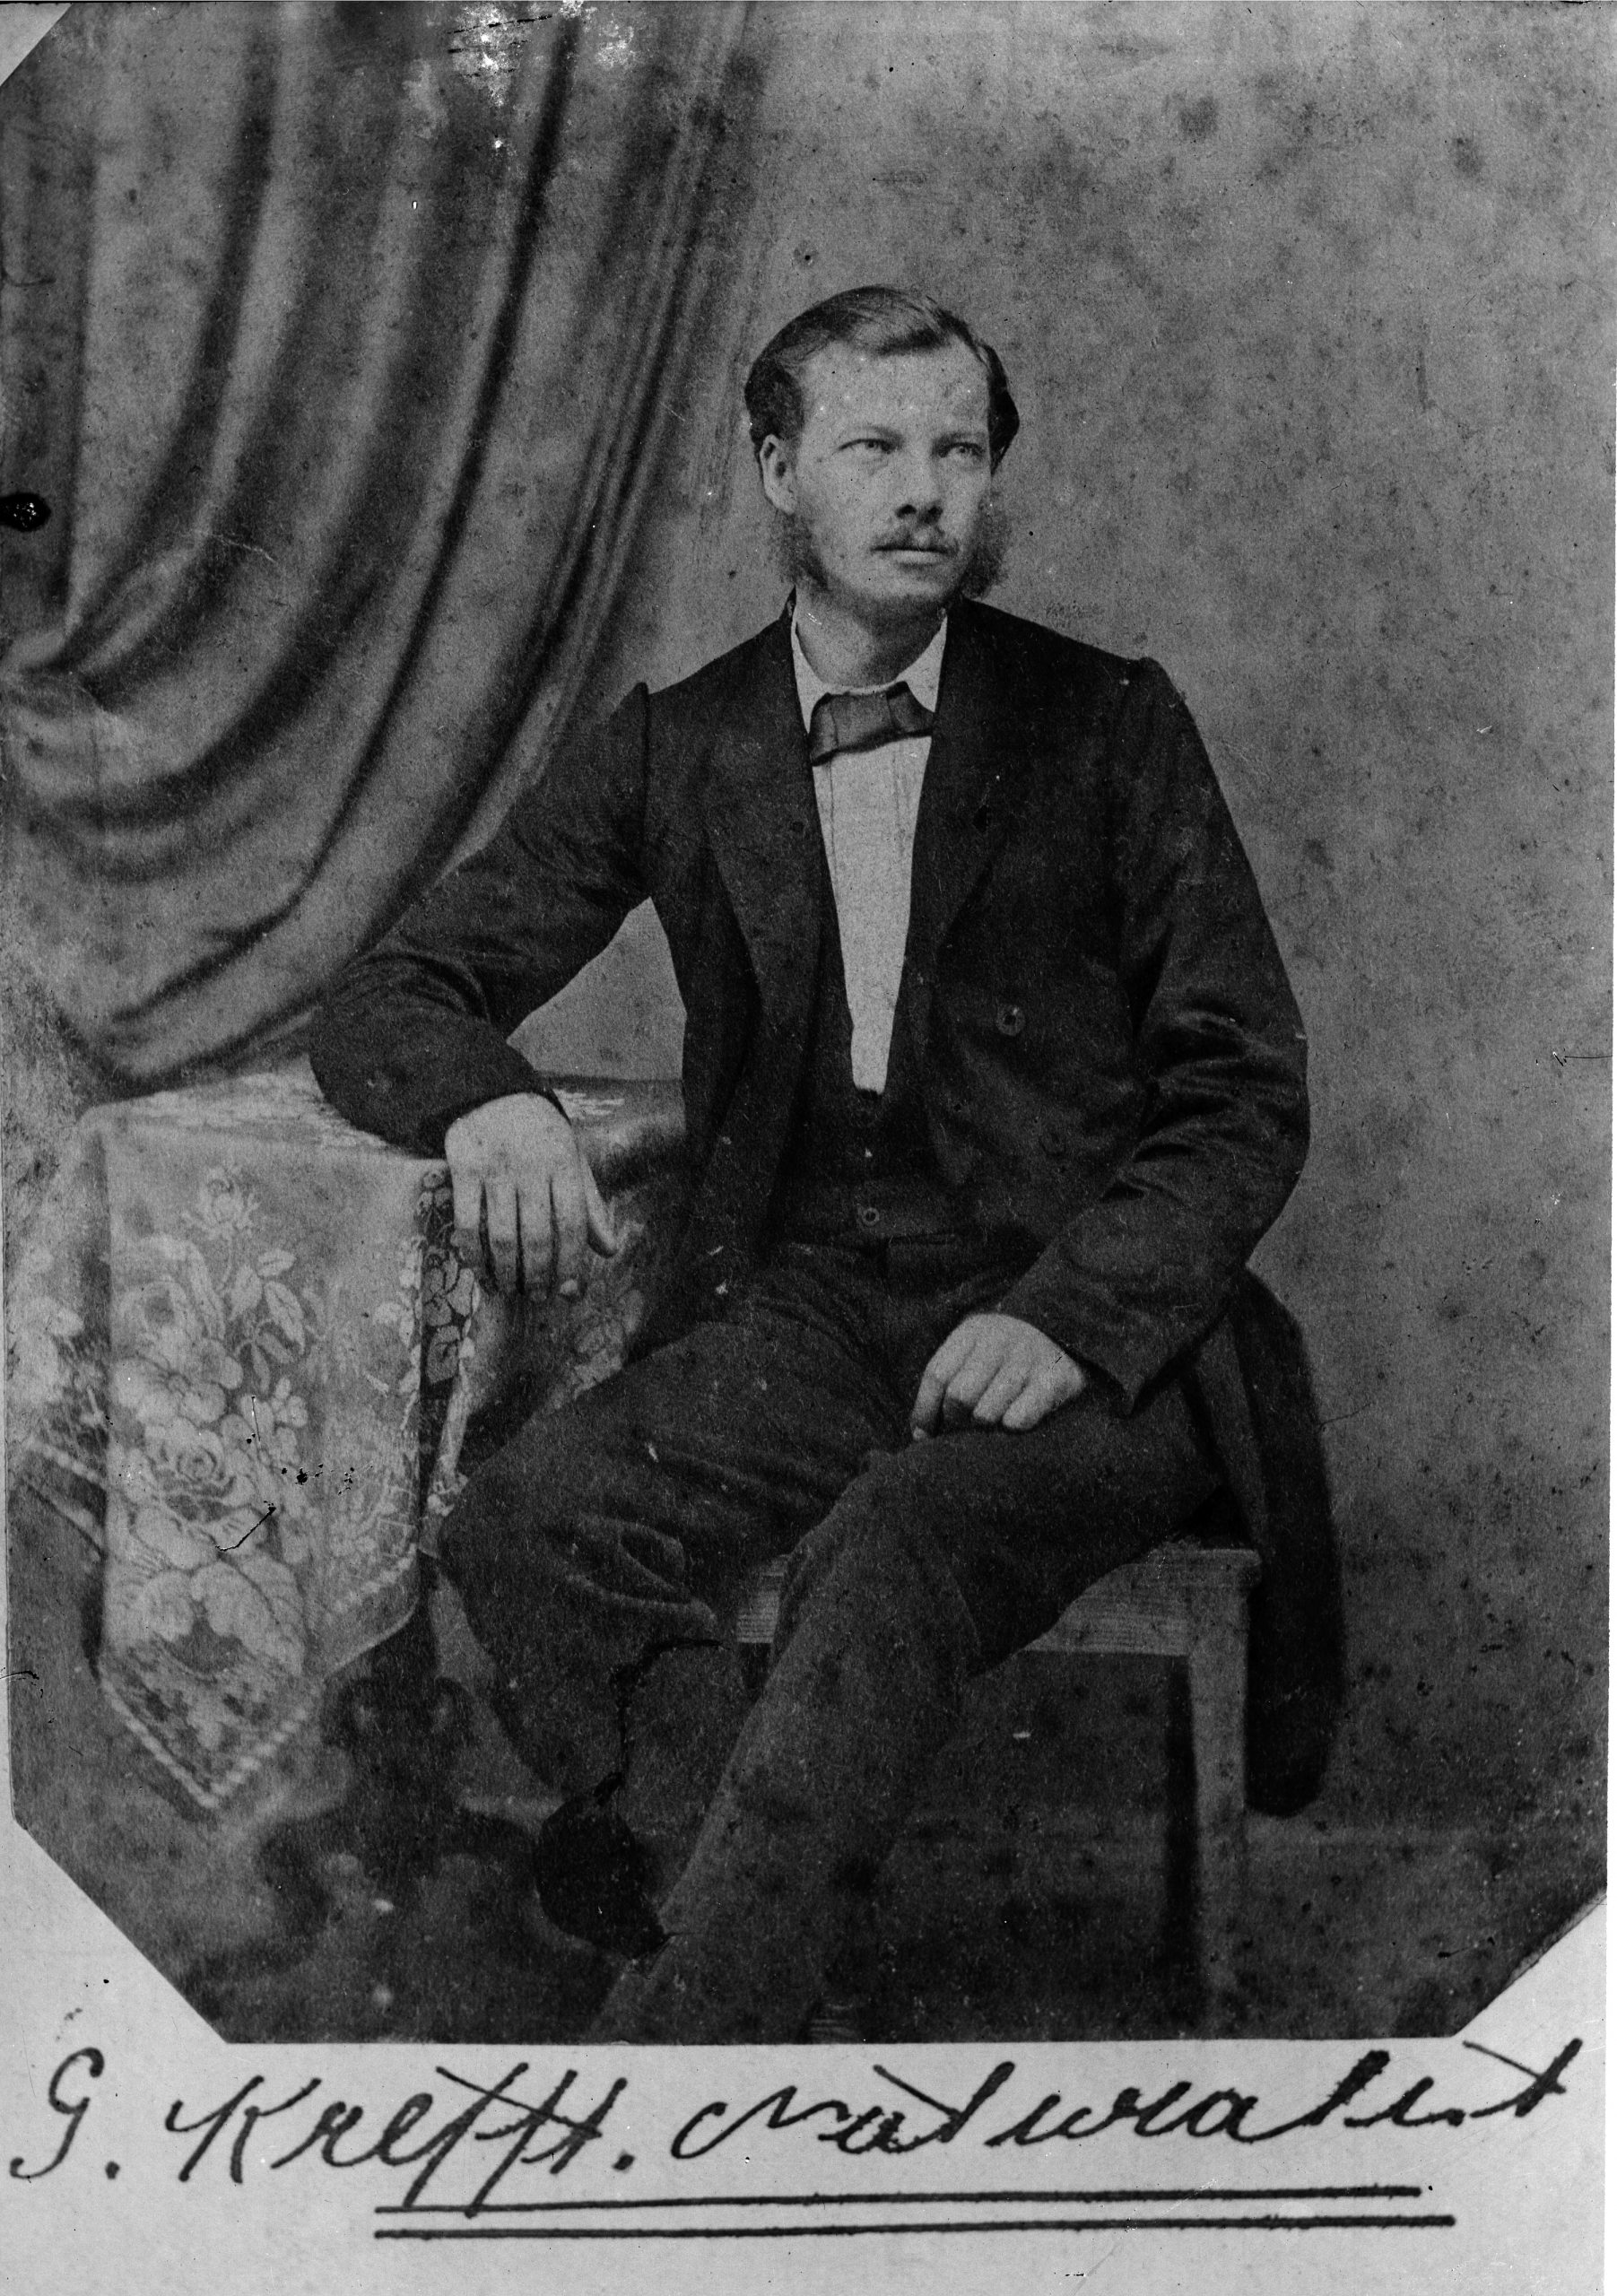 Portrait of a man seated in a suit